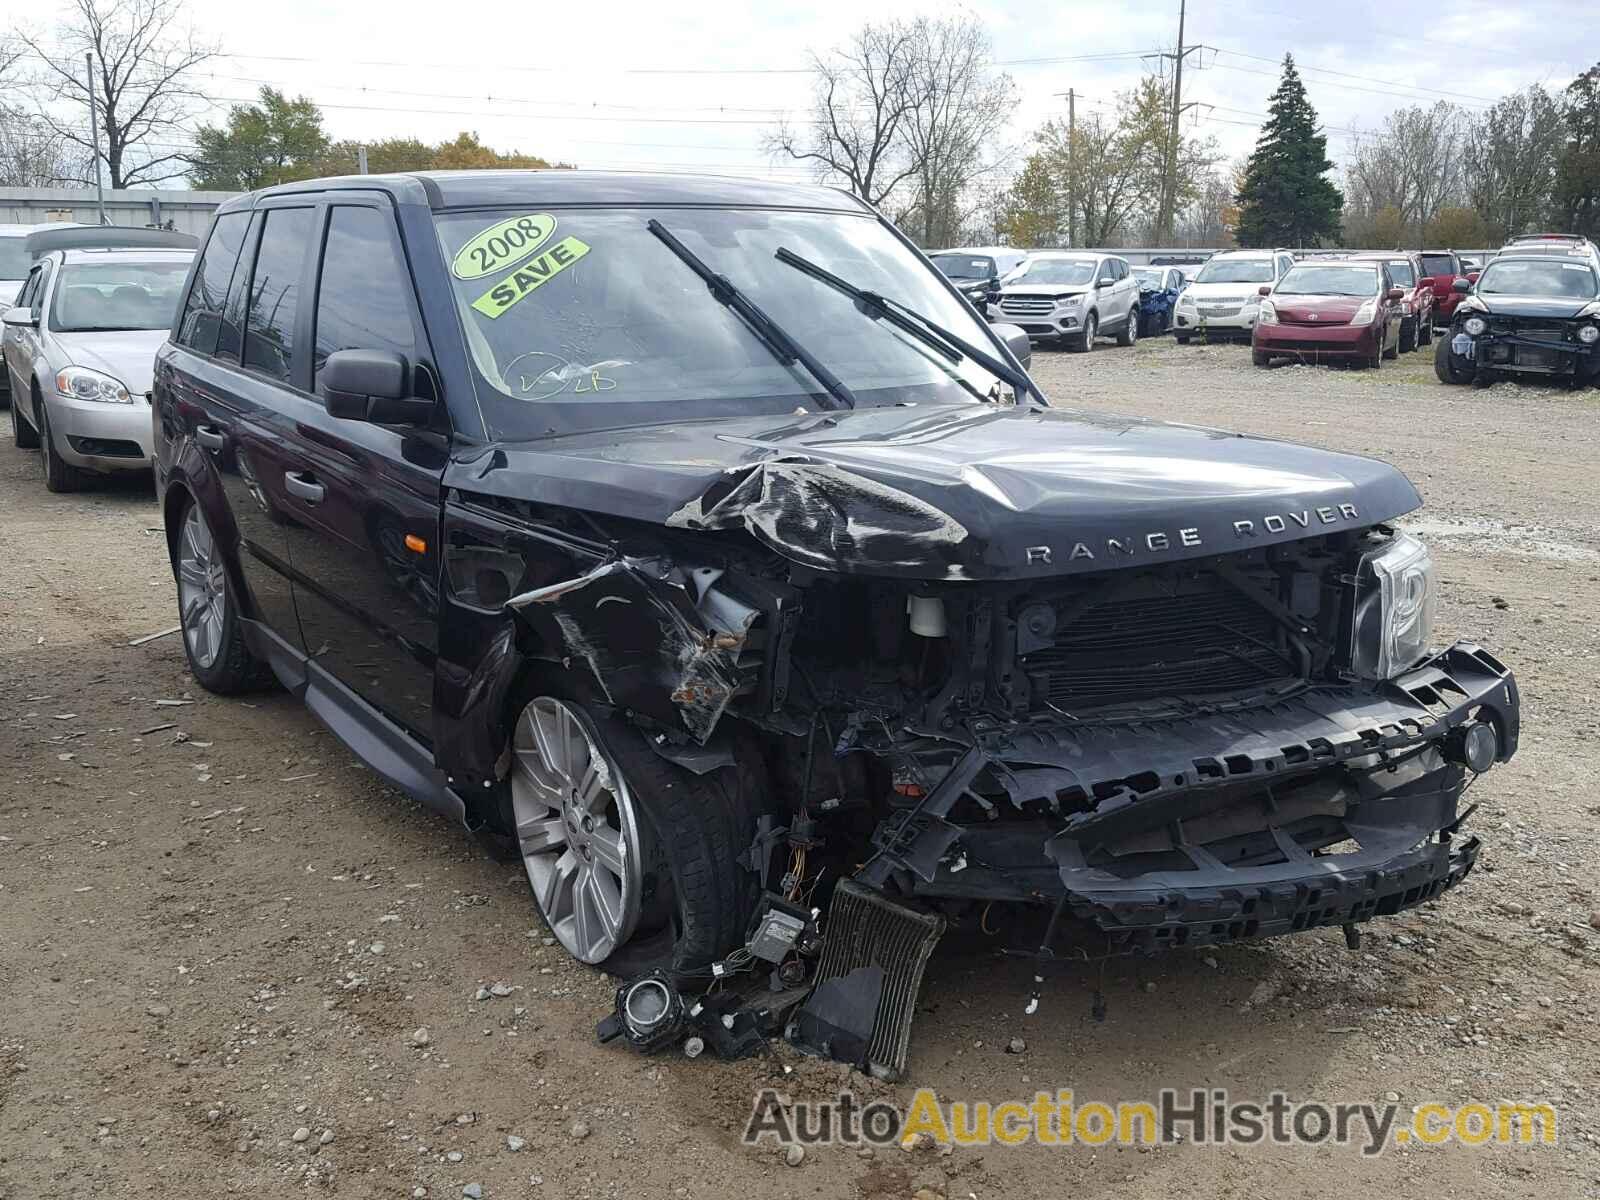 2008 LAND ROVER RANGE ROVER SPORT SUPERCHARGED, SALSH23428A182343